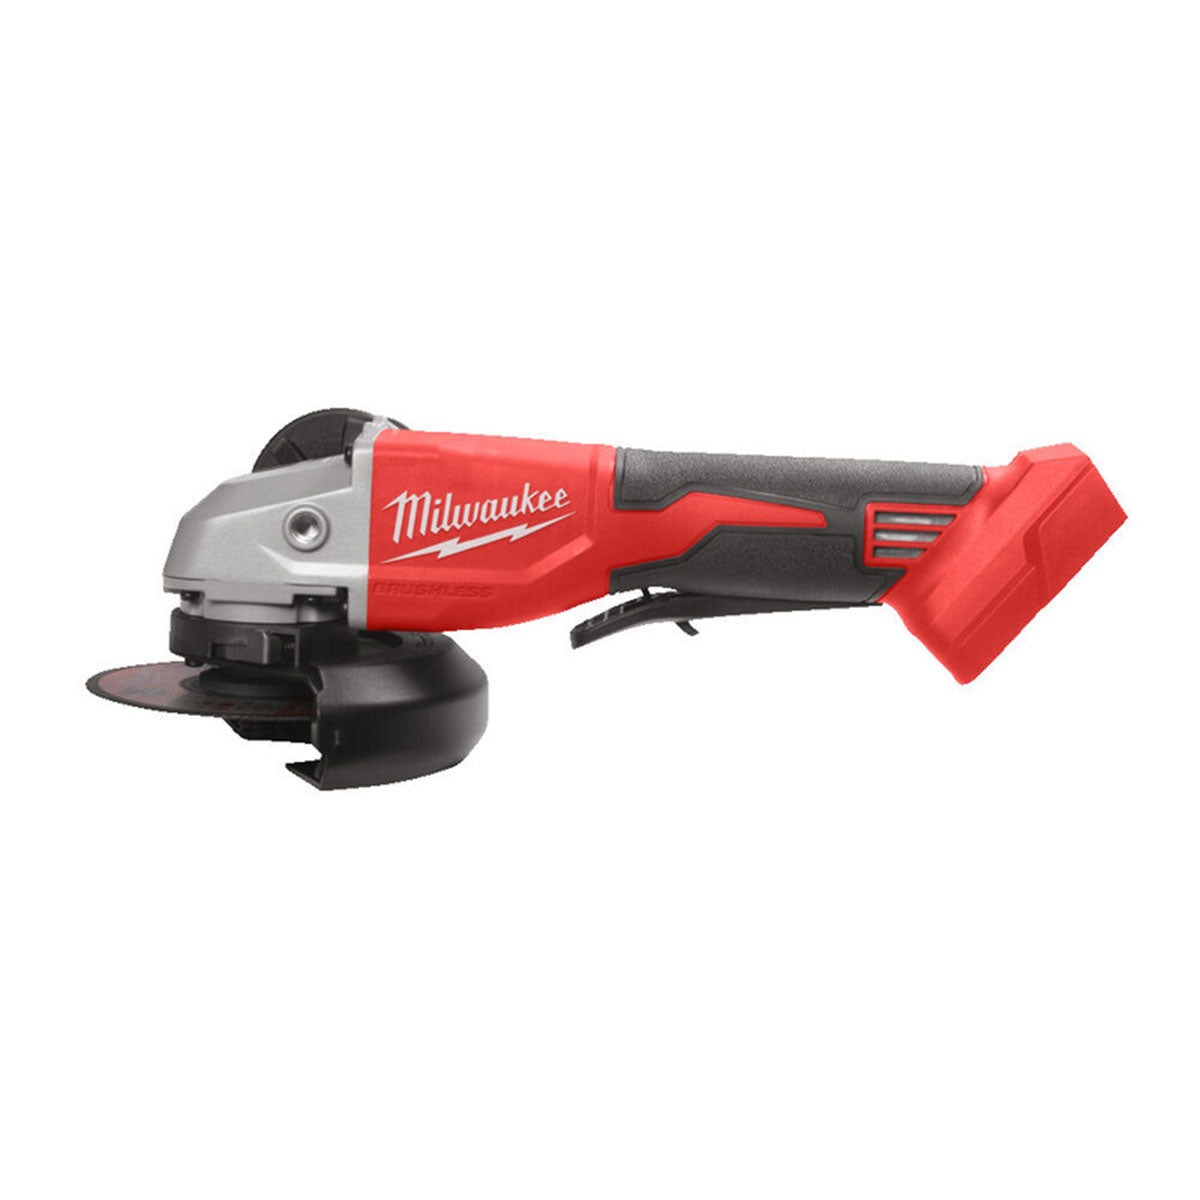 Milwaukee M18BLSAG115XPD-0 18V 115mm Brushless Angle Grinder With Paddle Switch 4933492647